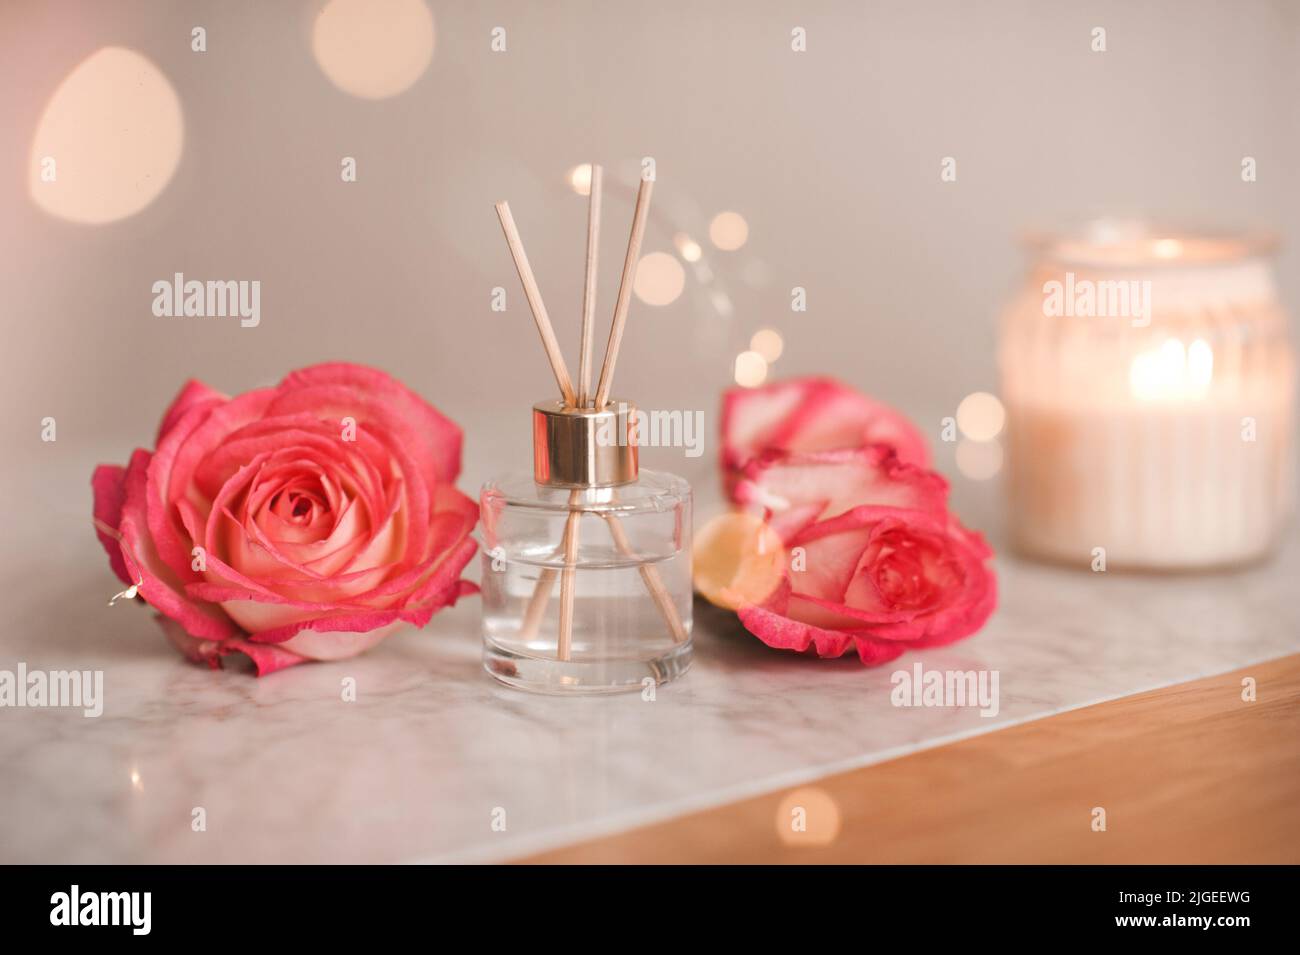 Liquid scented home fragrance in glass bottle and fresh rose flowers over burning candle and glow lights in room. Cozy atmosphere. Stock Photo